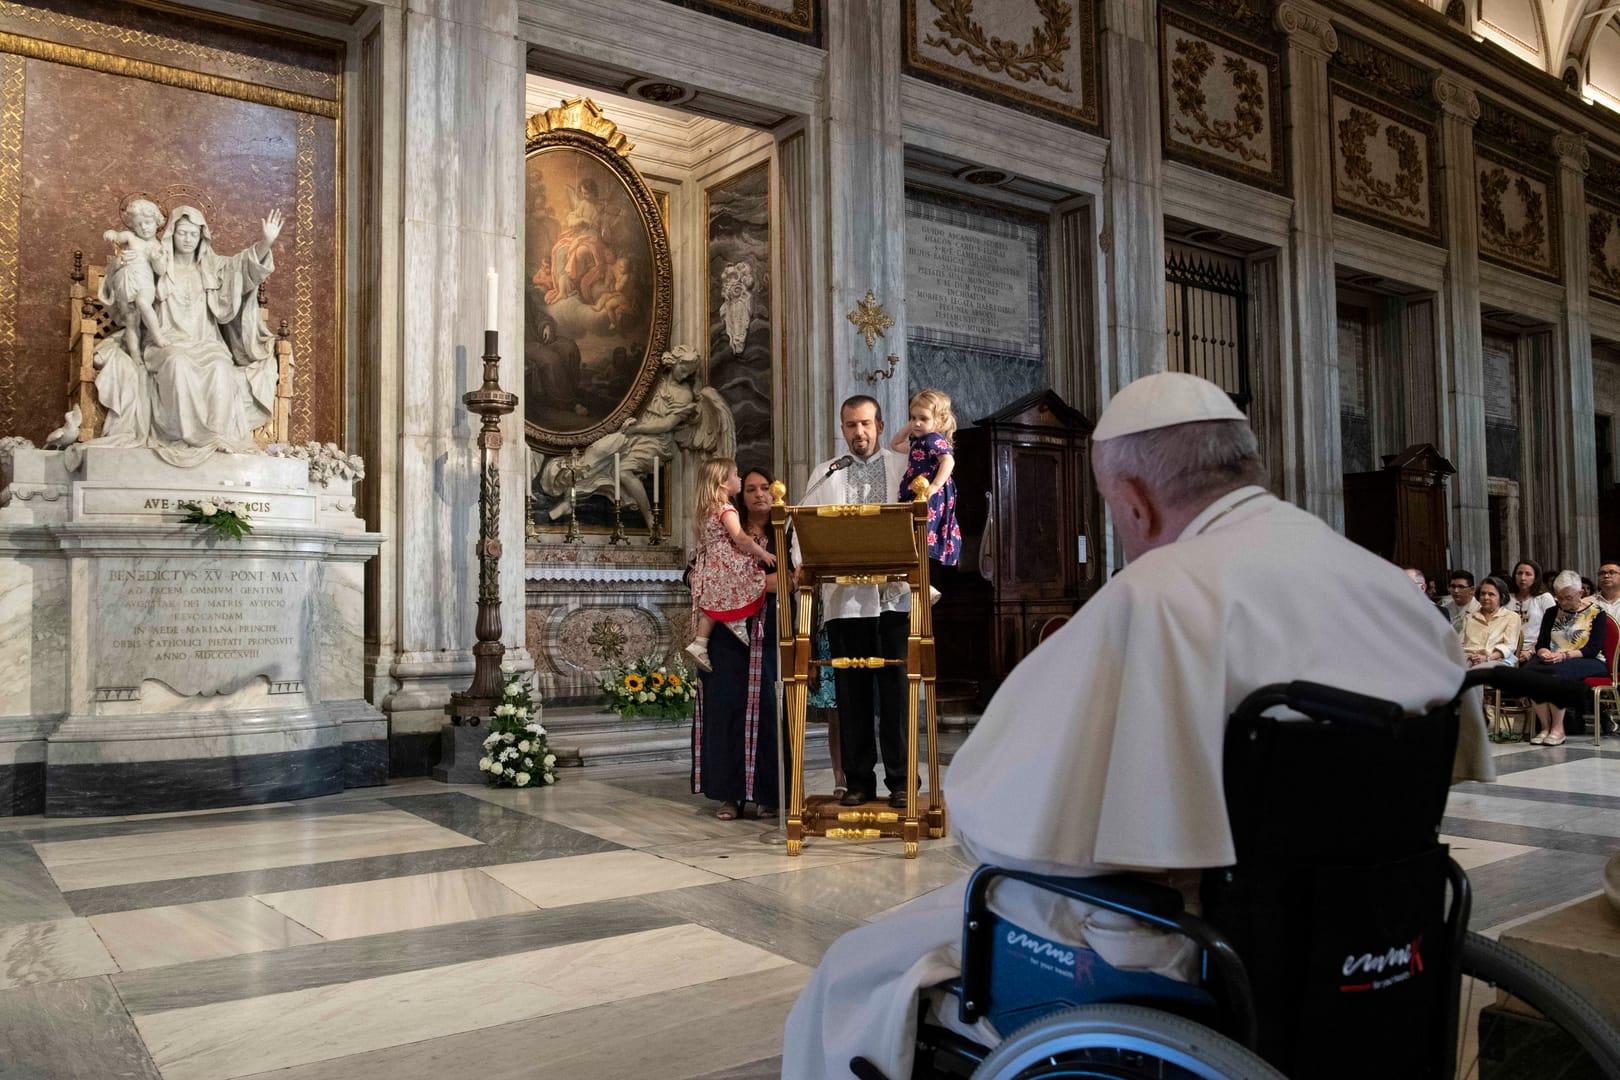 Educators must learn from, not relive, the past, pope says